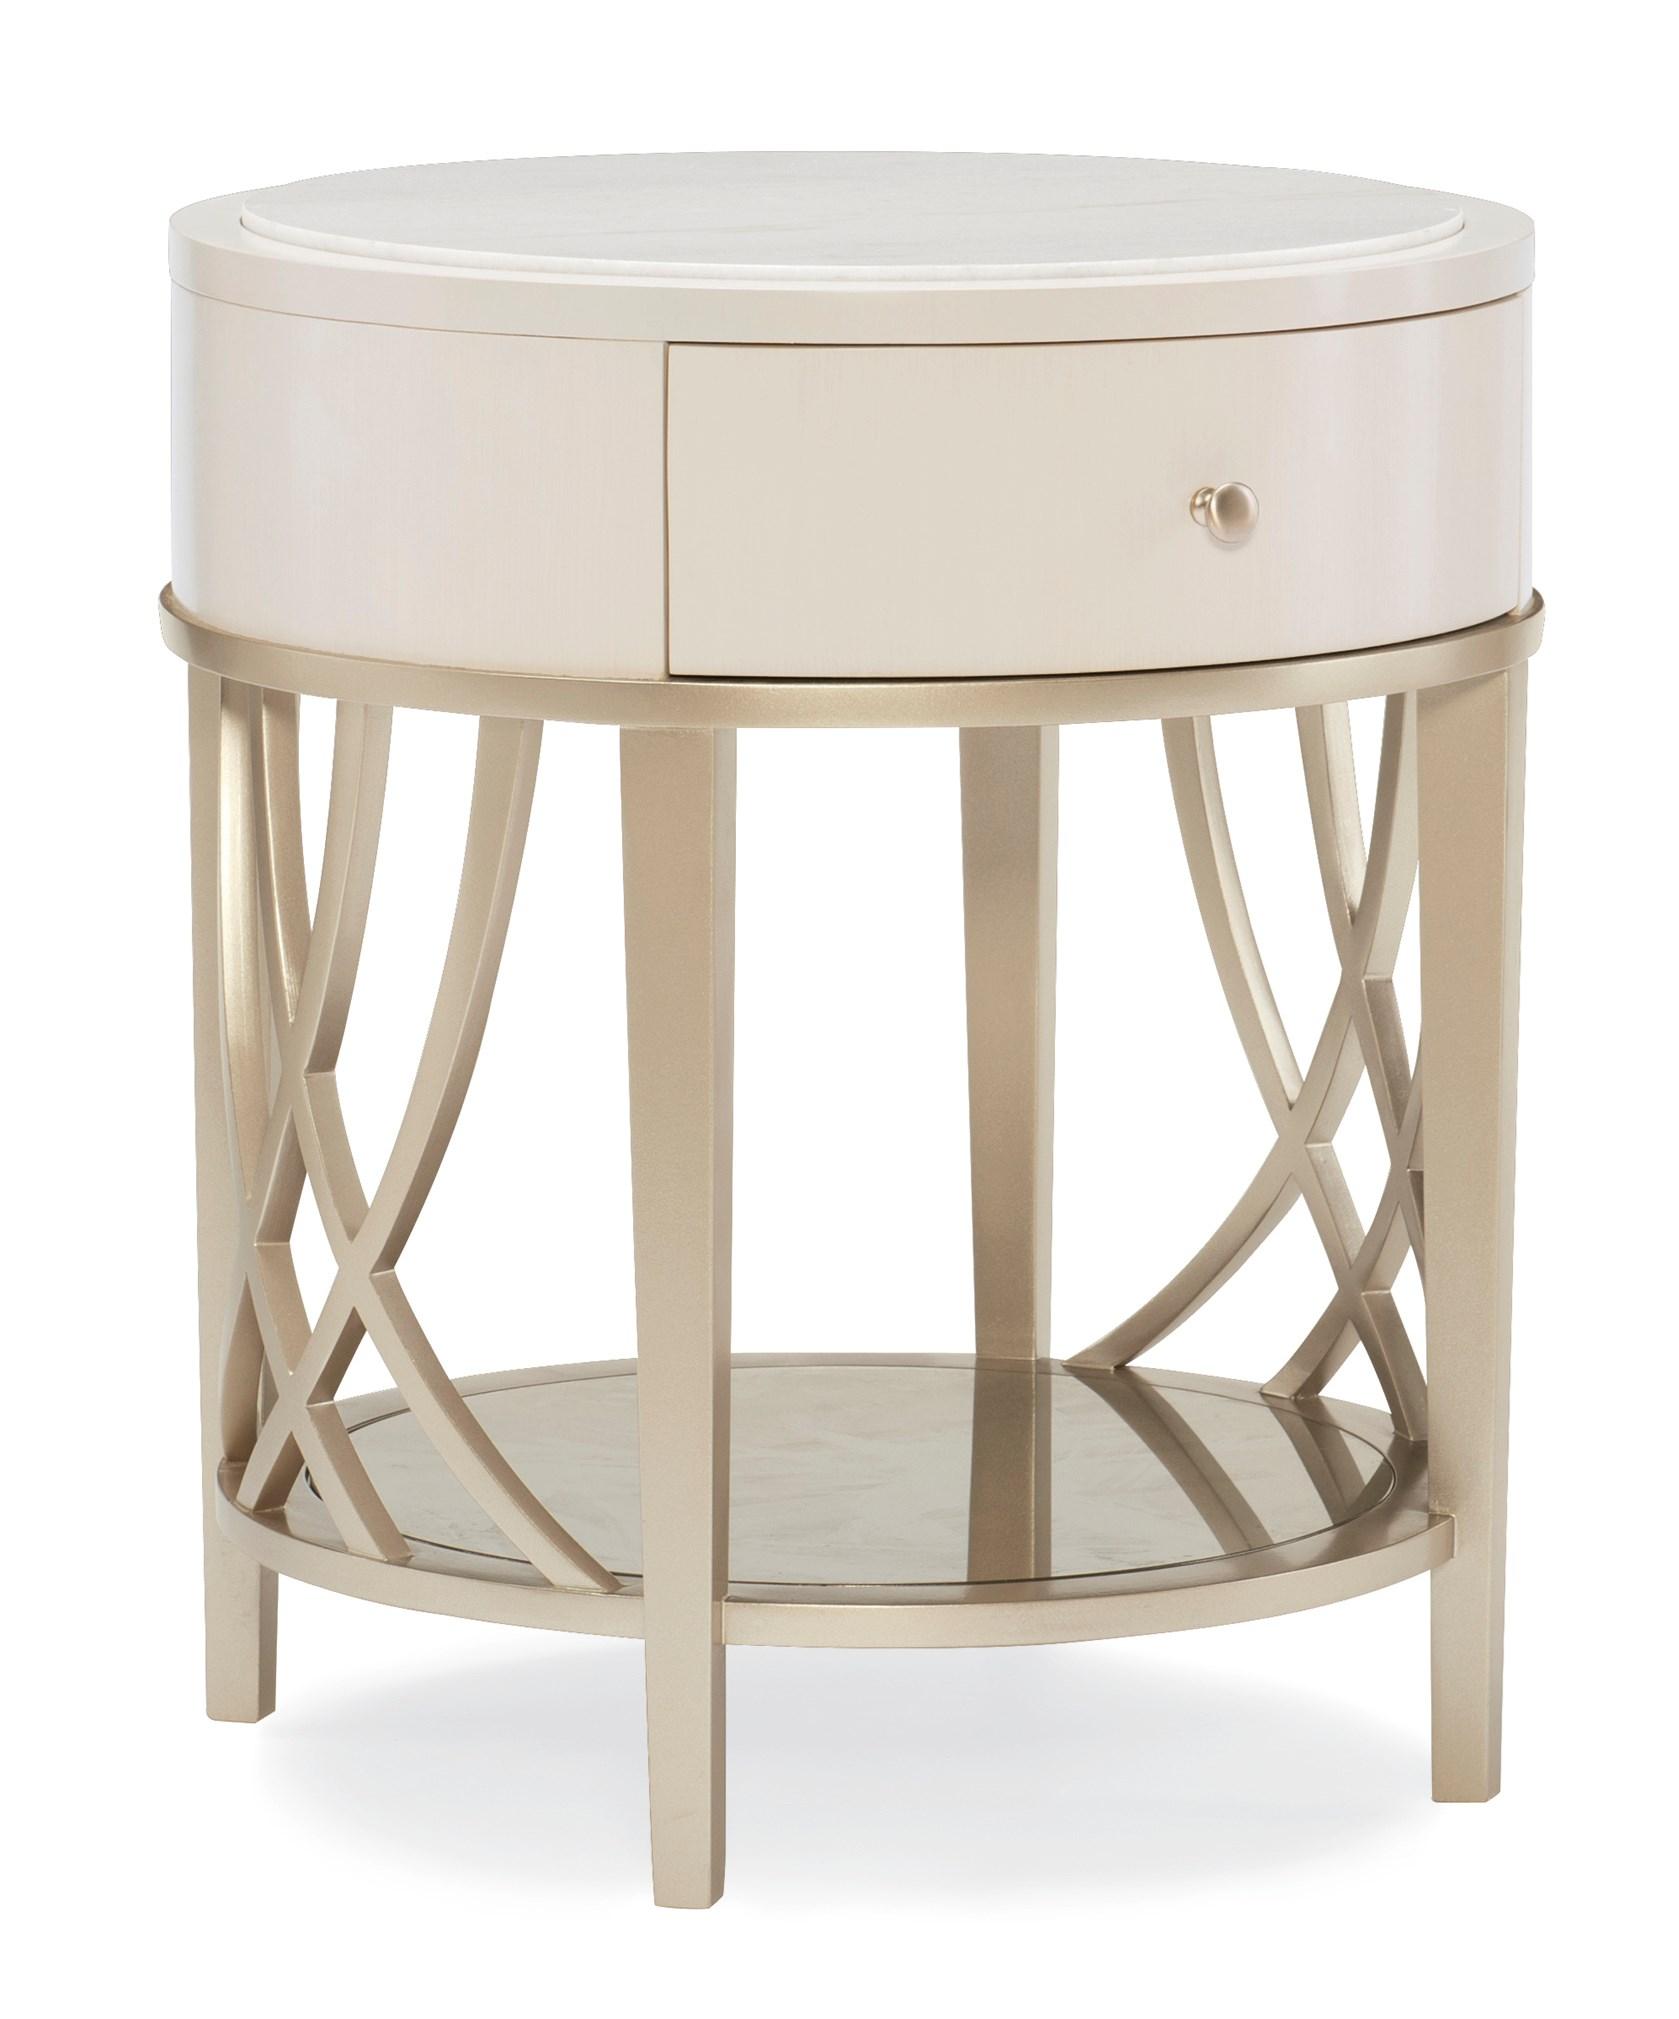 Contemporary End Table ADELA END TABLE C011-016-411 in Off-White, Light Grey, Taupe 